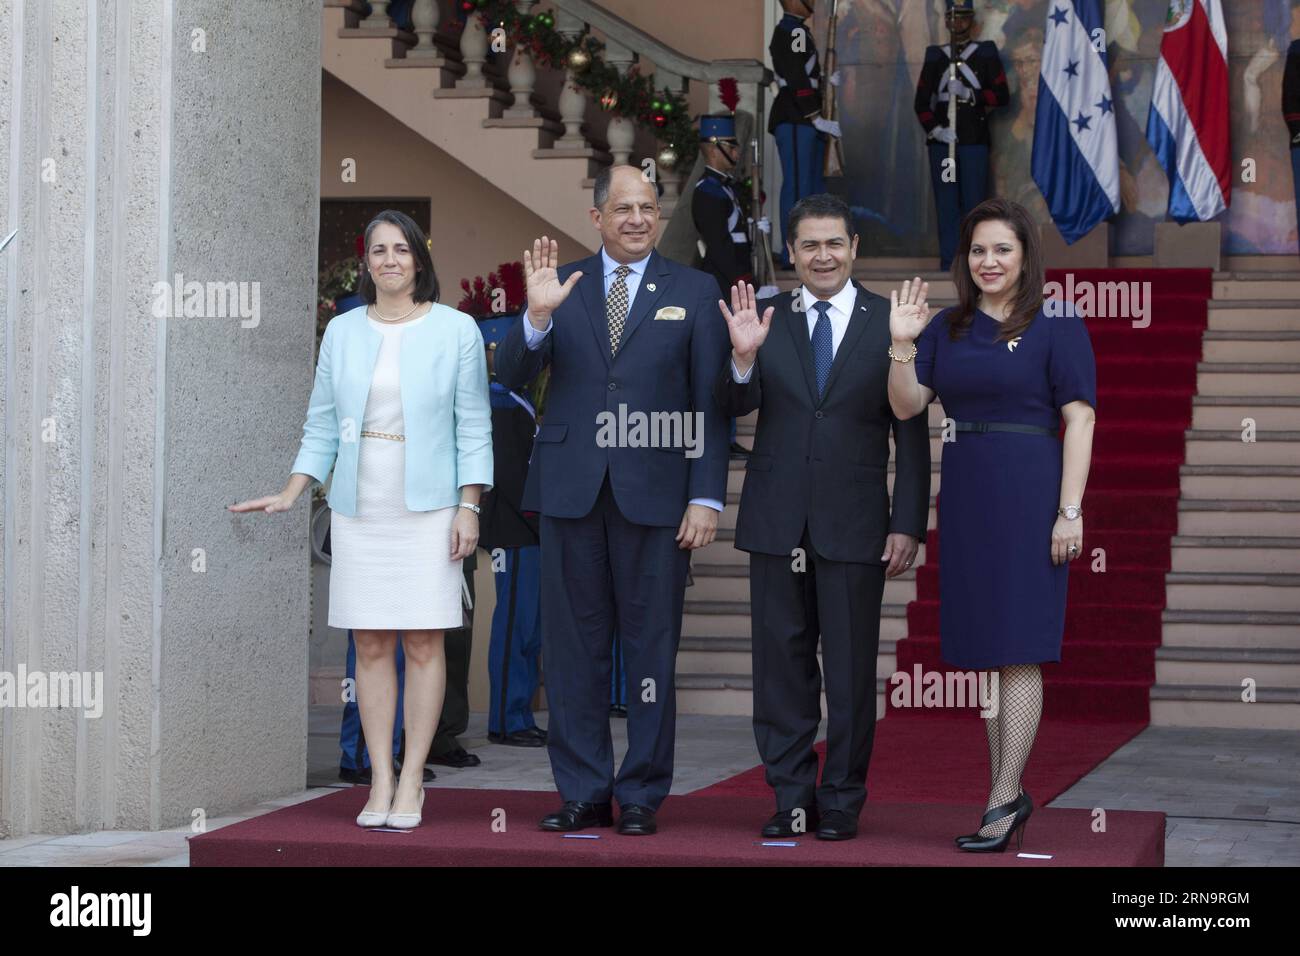 (151217) -- TEGUCIGALPA, Dec. 17, 2015 -- President of Honduras Juan Orlando Hernandez (2nd R) and his wife Ana Garcia de Hernandez (1st R) welcome Costa Rica s President Luis Guillermo Solis (2nd L) and his wife Mercedes Penas at Presidential House in Tegucigalpa, capital of Honduras, Dec. 17, 2015. Rafael Ochoa) (jg) (ah) HONDURAS-TEGUCIGALPA-COSTA RICA-POLITICS-VISIT e RAFAELxOCHOA PUBLICATIONxNOTxINxCHN   151217 Tegucigalpa DEC 17 2015 President of Honduras Juan Orlando Hernandez 2nd r and His wife Ana Garcia de Hernandez 1st r Welcome Costa Rica S President Luis Guillermo Solis 2nd l and Stock Photo